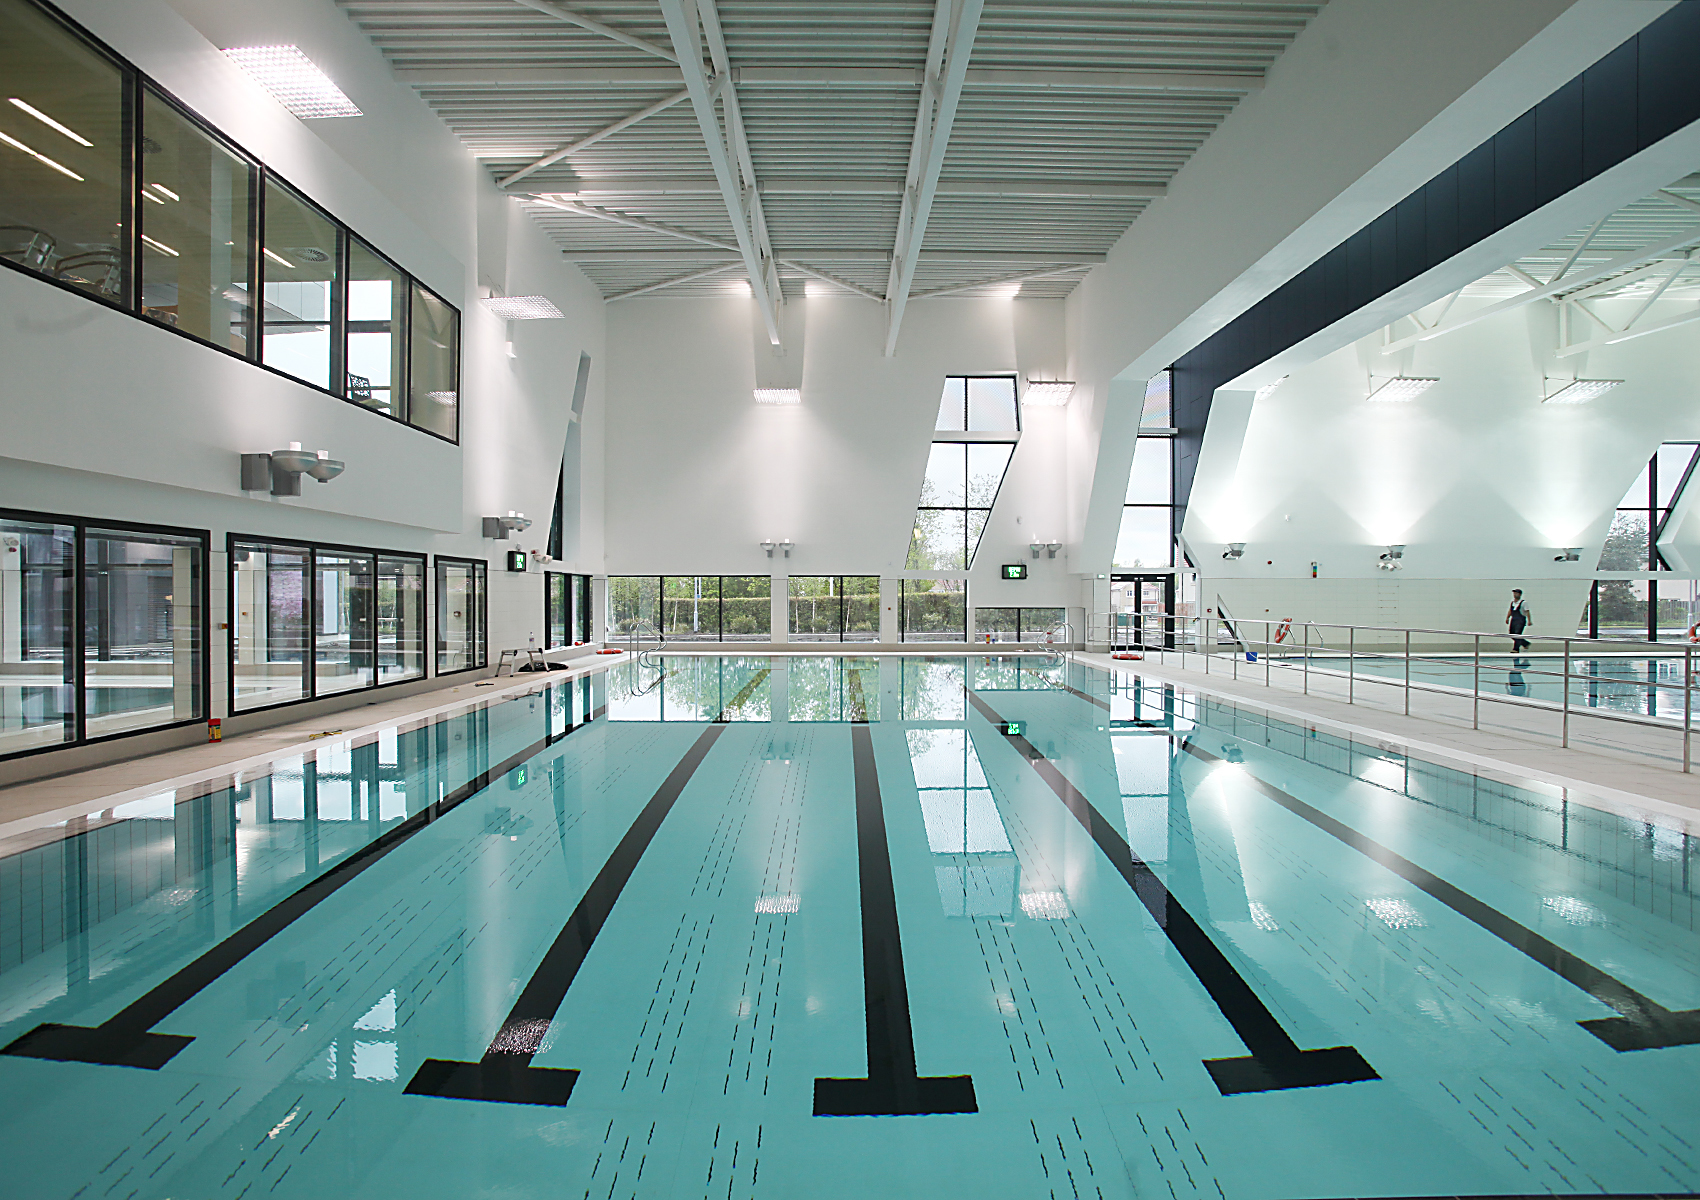 The pool at Michael Woods Sports and Leisure Centre in Glenrothes.